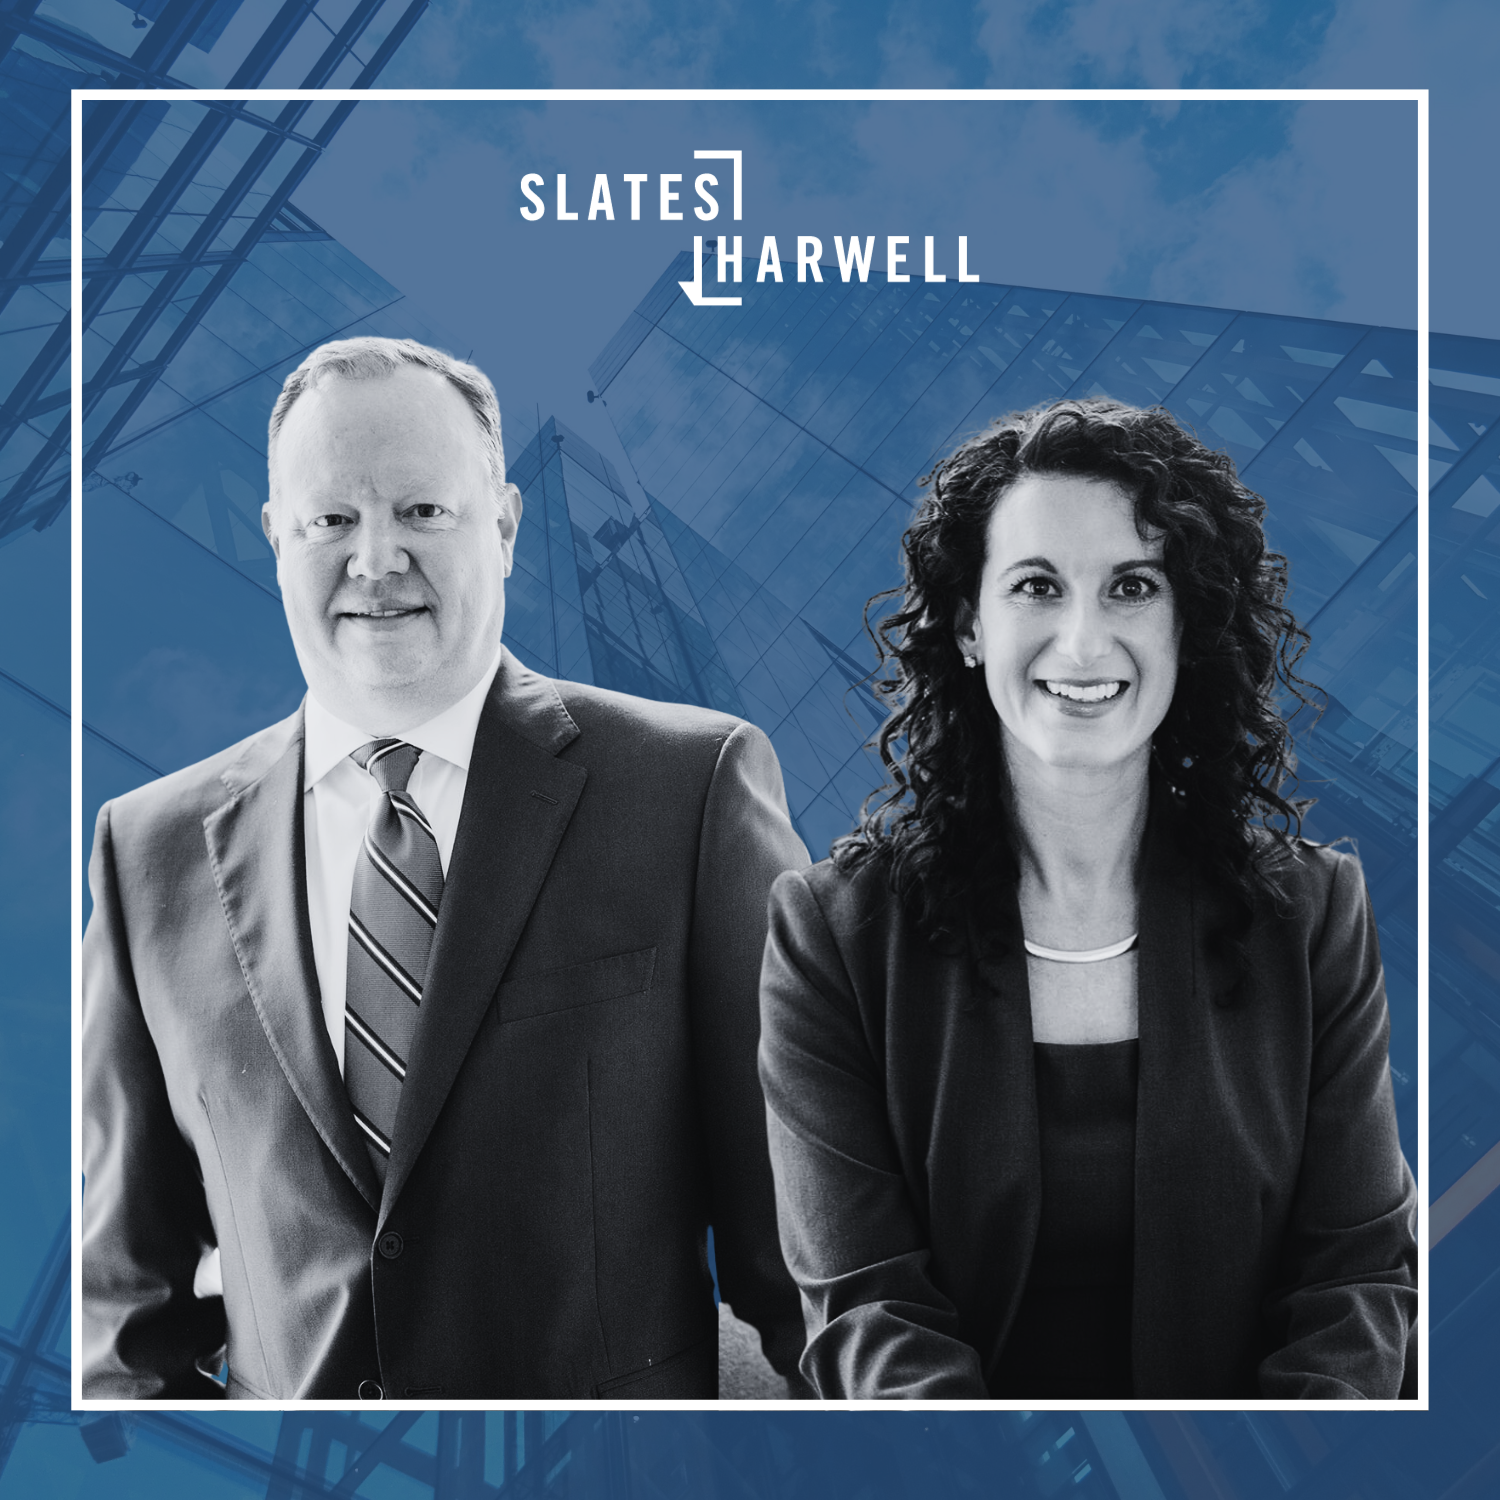 Slates Harwell recognizes John Slates and Colbie Campbell as presenters at the 36th Annual Construction Law Conference.